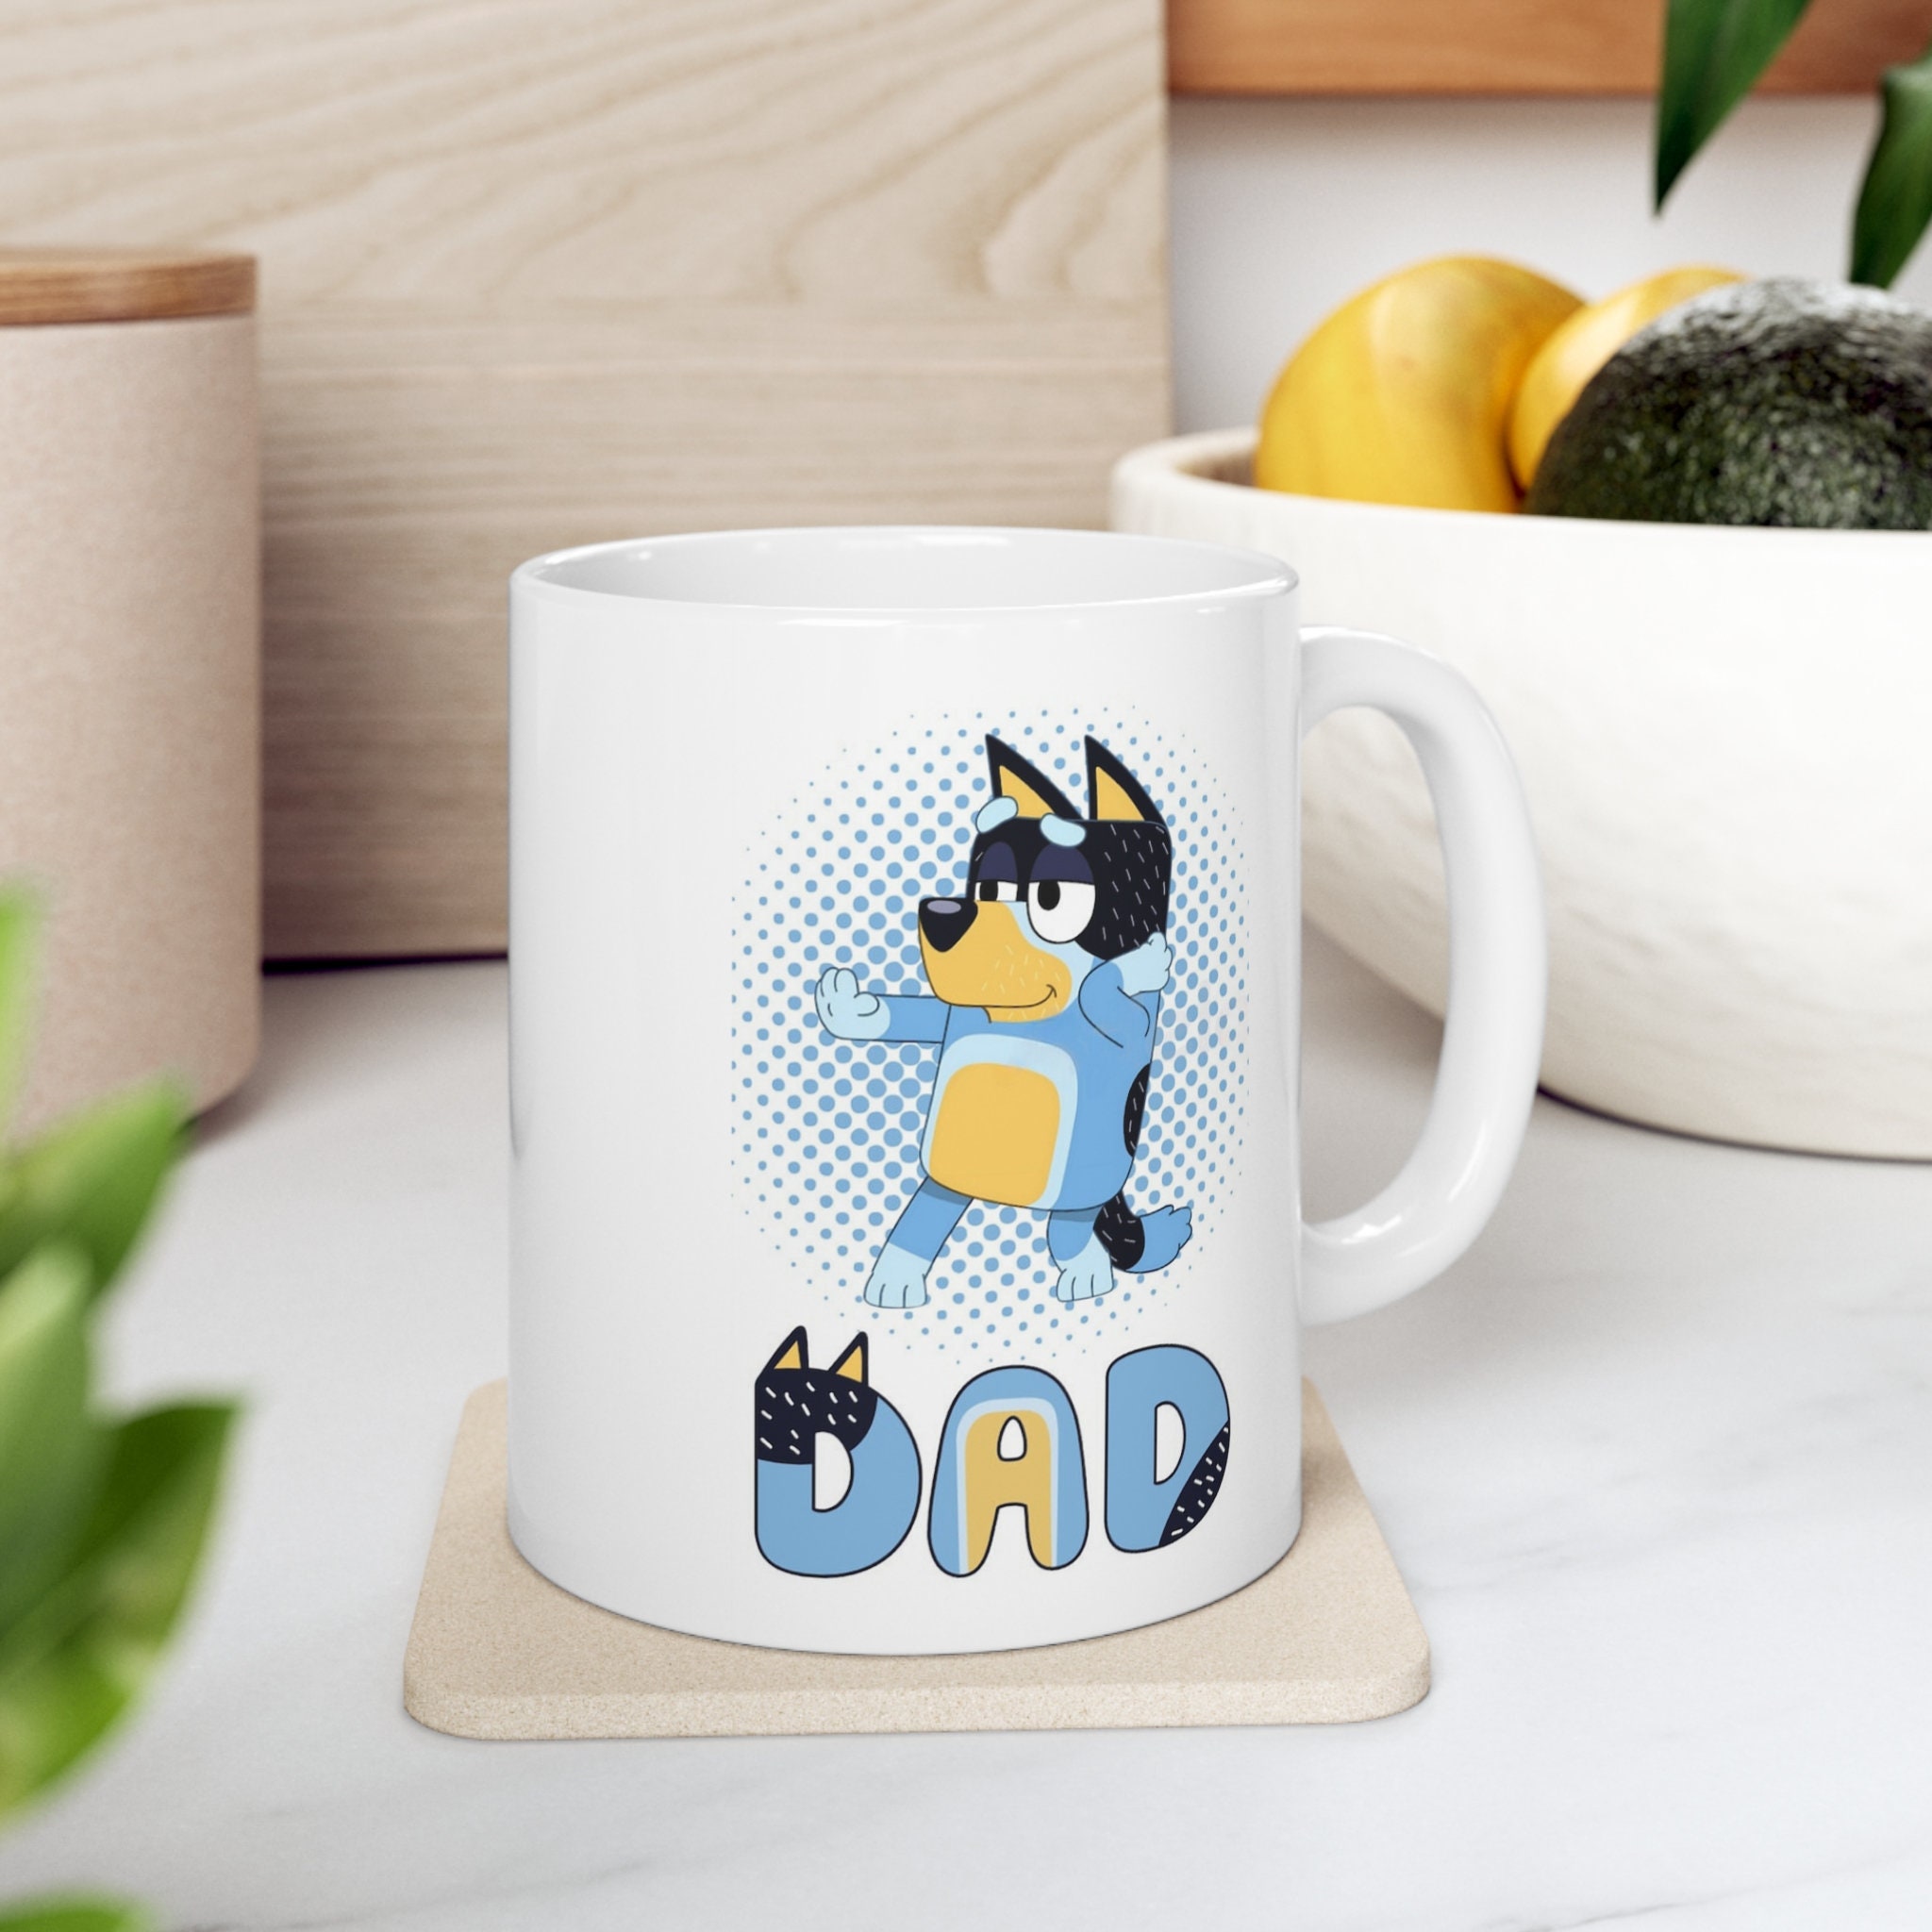 Bluey Dad Mug, Customize Bluey Bandit Coffee Mug, Gift For Dad From Kids,  Fathers Day Gifts - Mugs - Rochester, New York, Facebook Marketplace